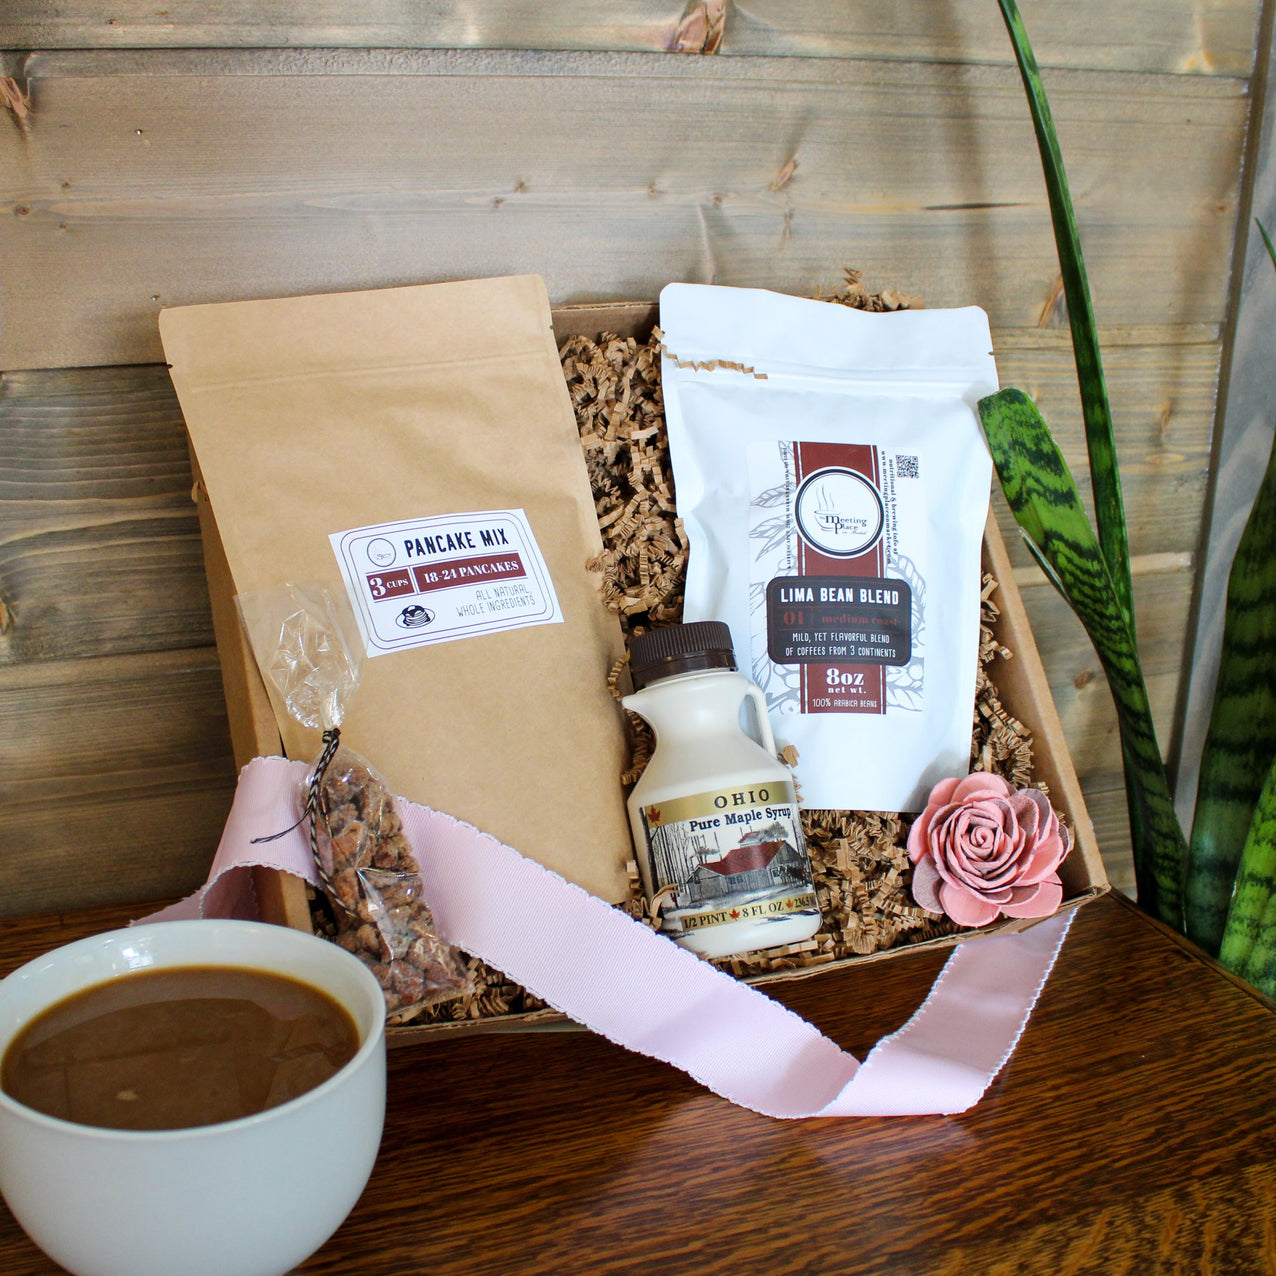 Breakfast in Bed Gift Box with Pancakes, Maple Syrup, and Coffee, and Wood Flower Magnet Mother's Day Gift Basket - The Meeting Place on Market